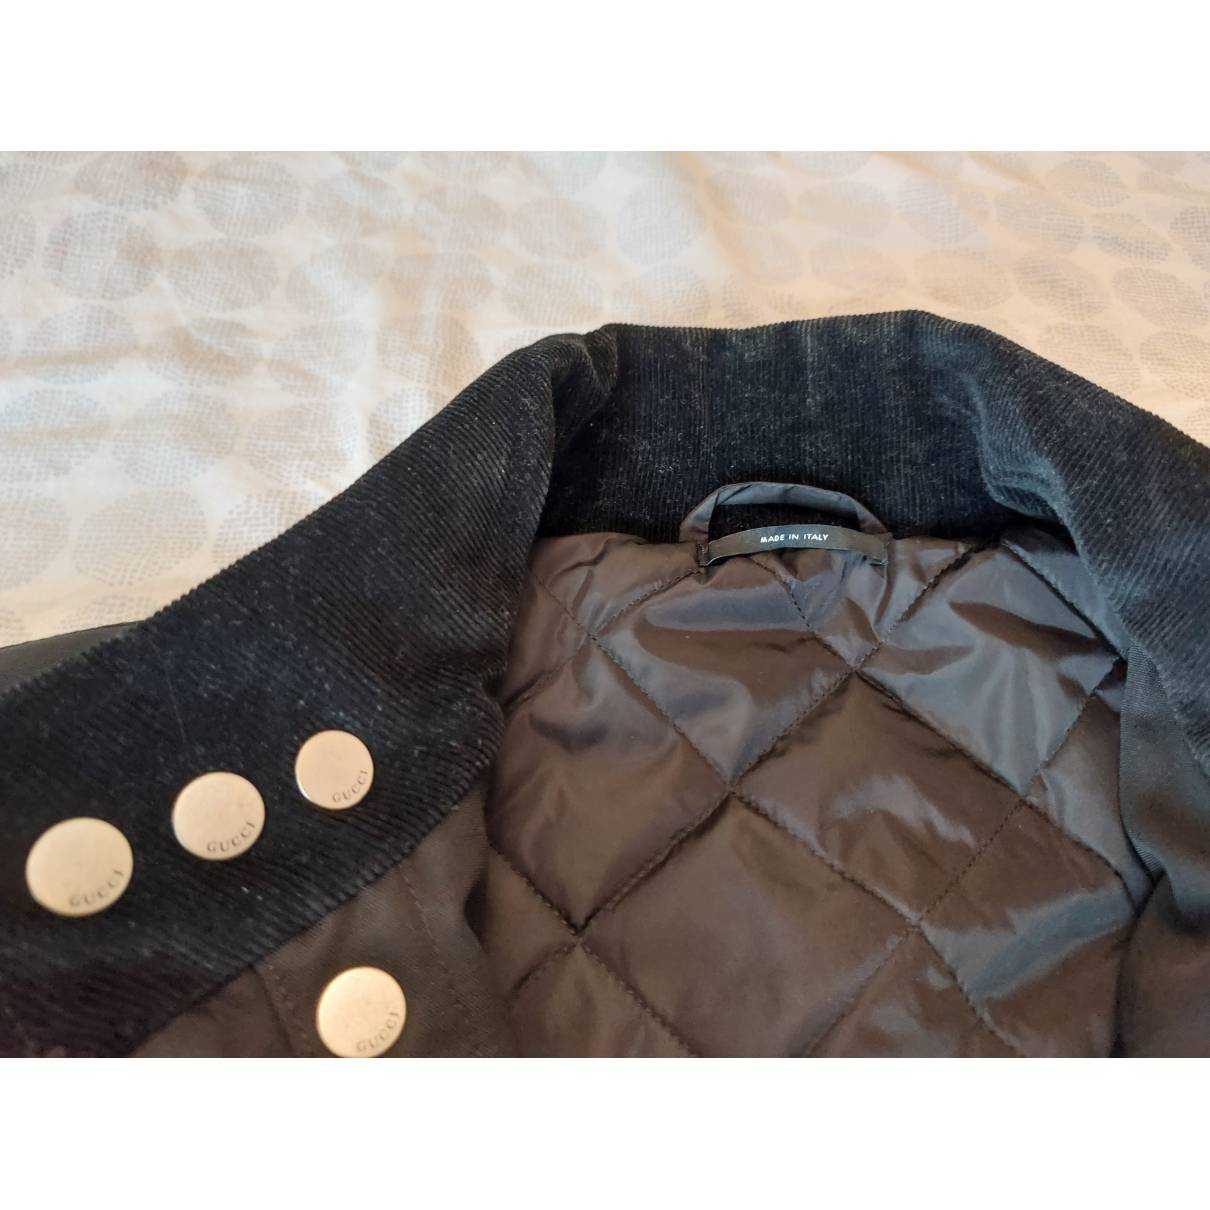 Jacket Gucci Black size M International in Synthetic - 33680668